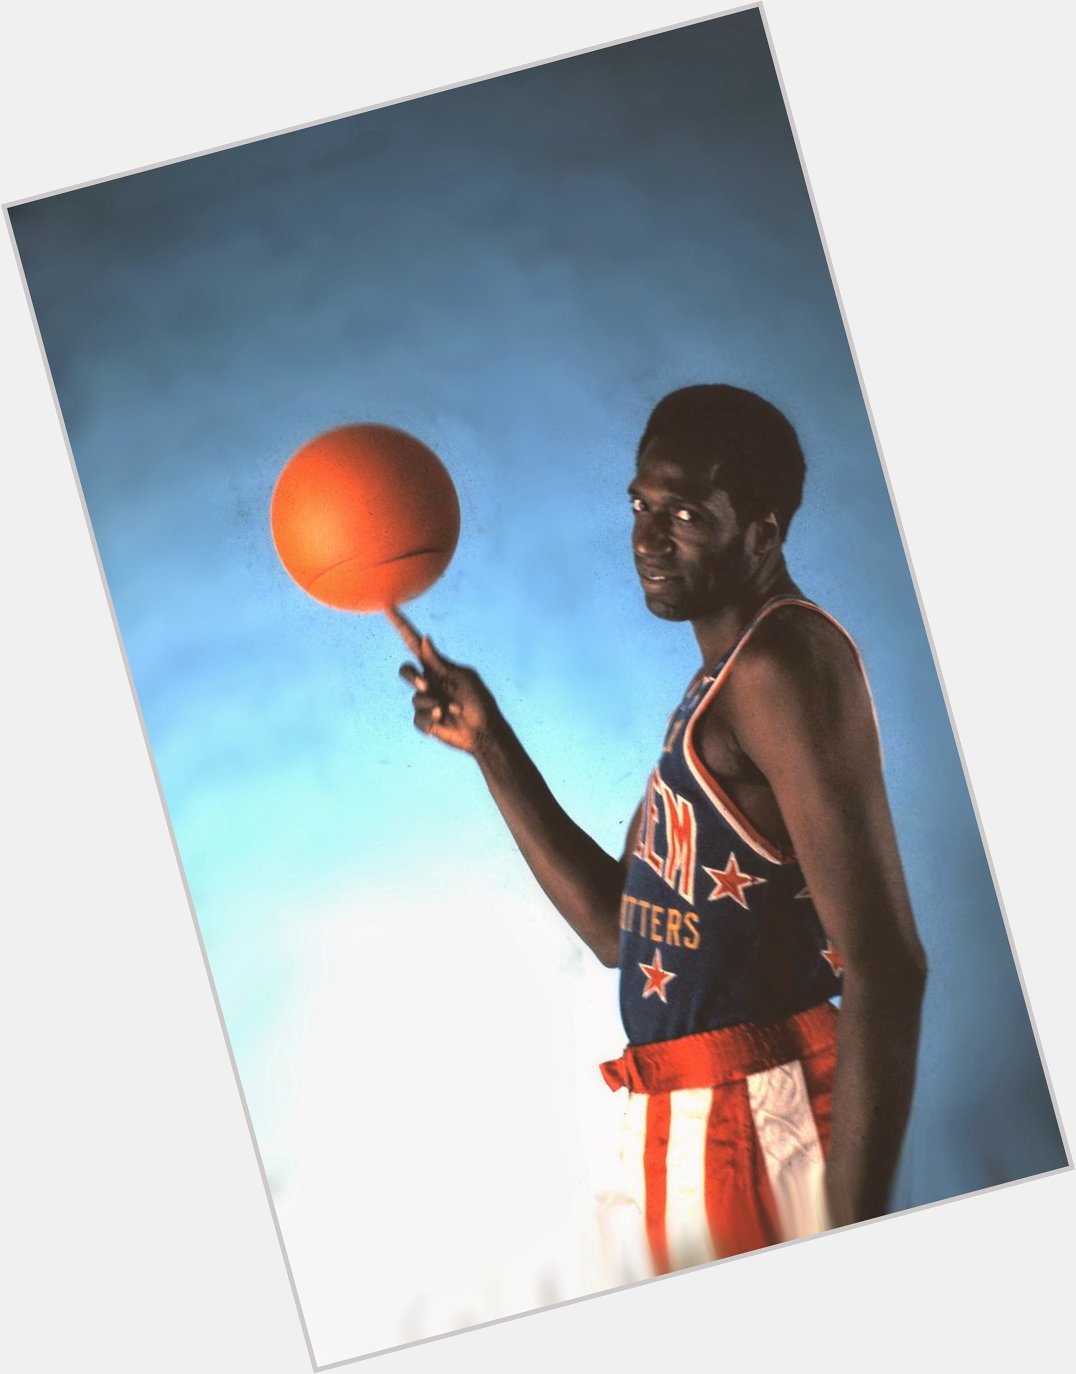 On his birthday, another photo from my Dad\s collection.
Happy Birthday, Meadowlark Lemon! 